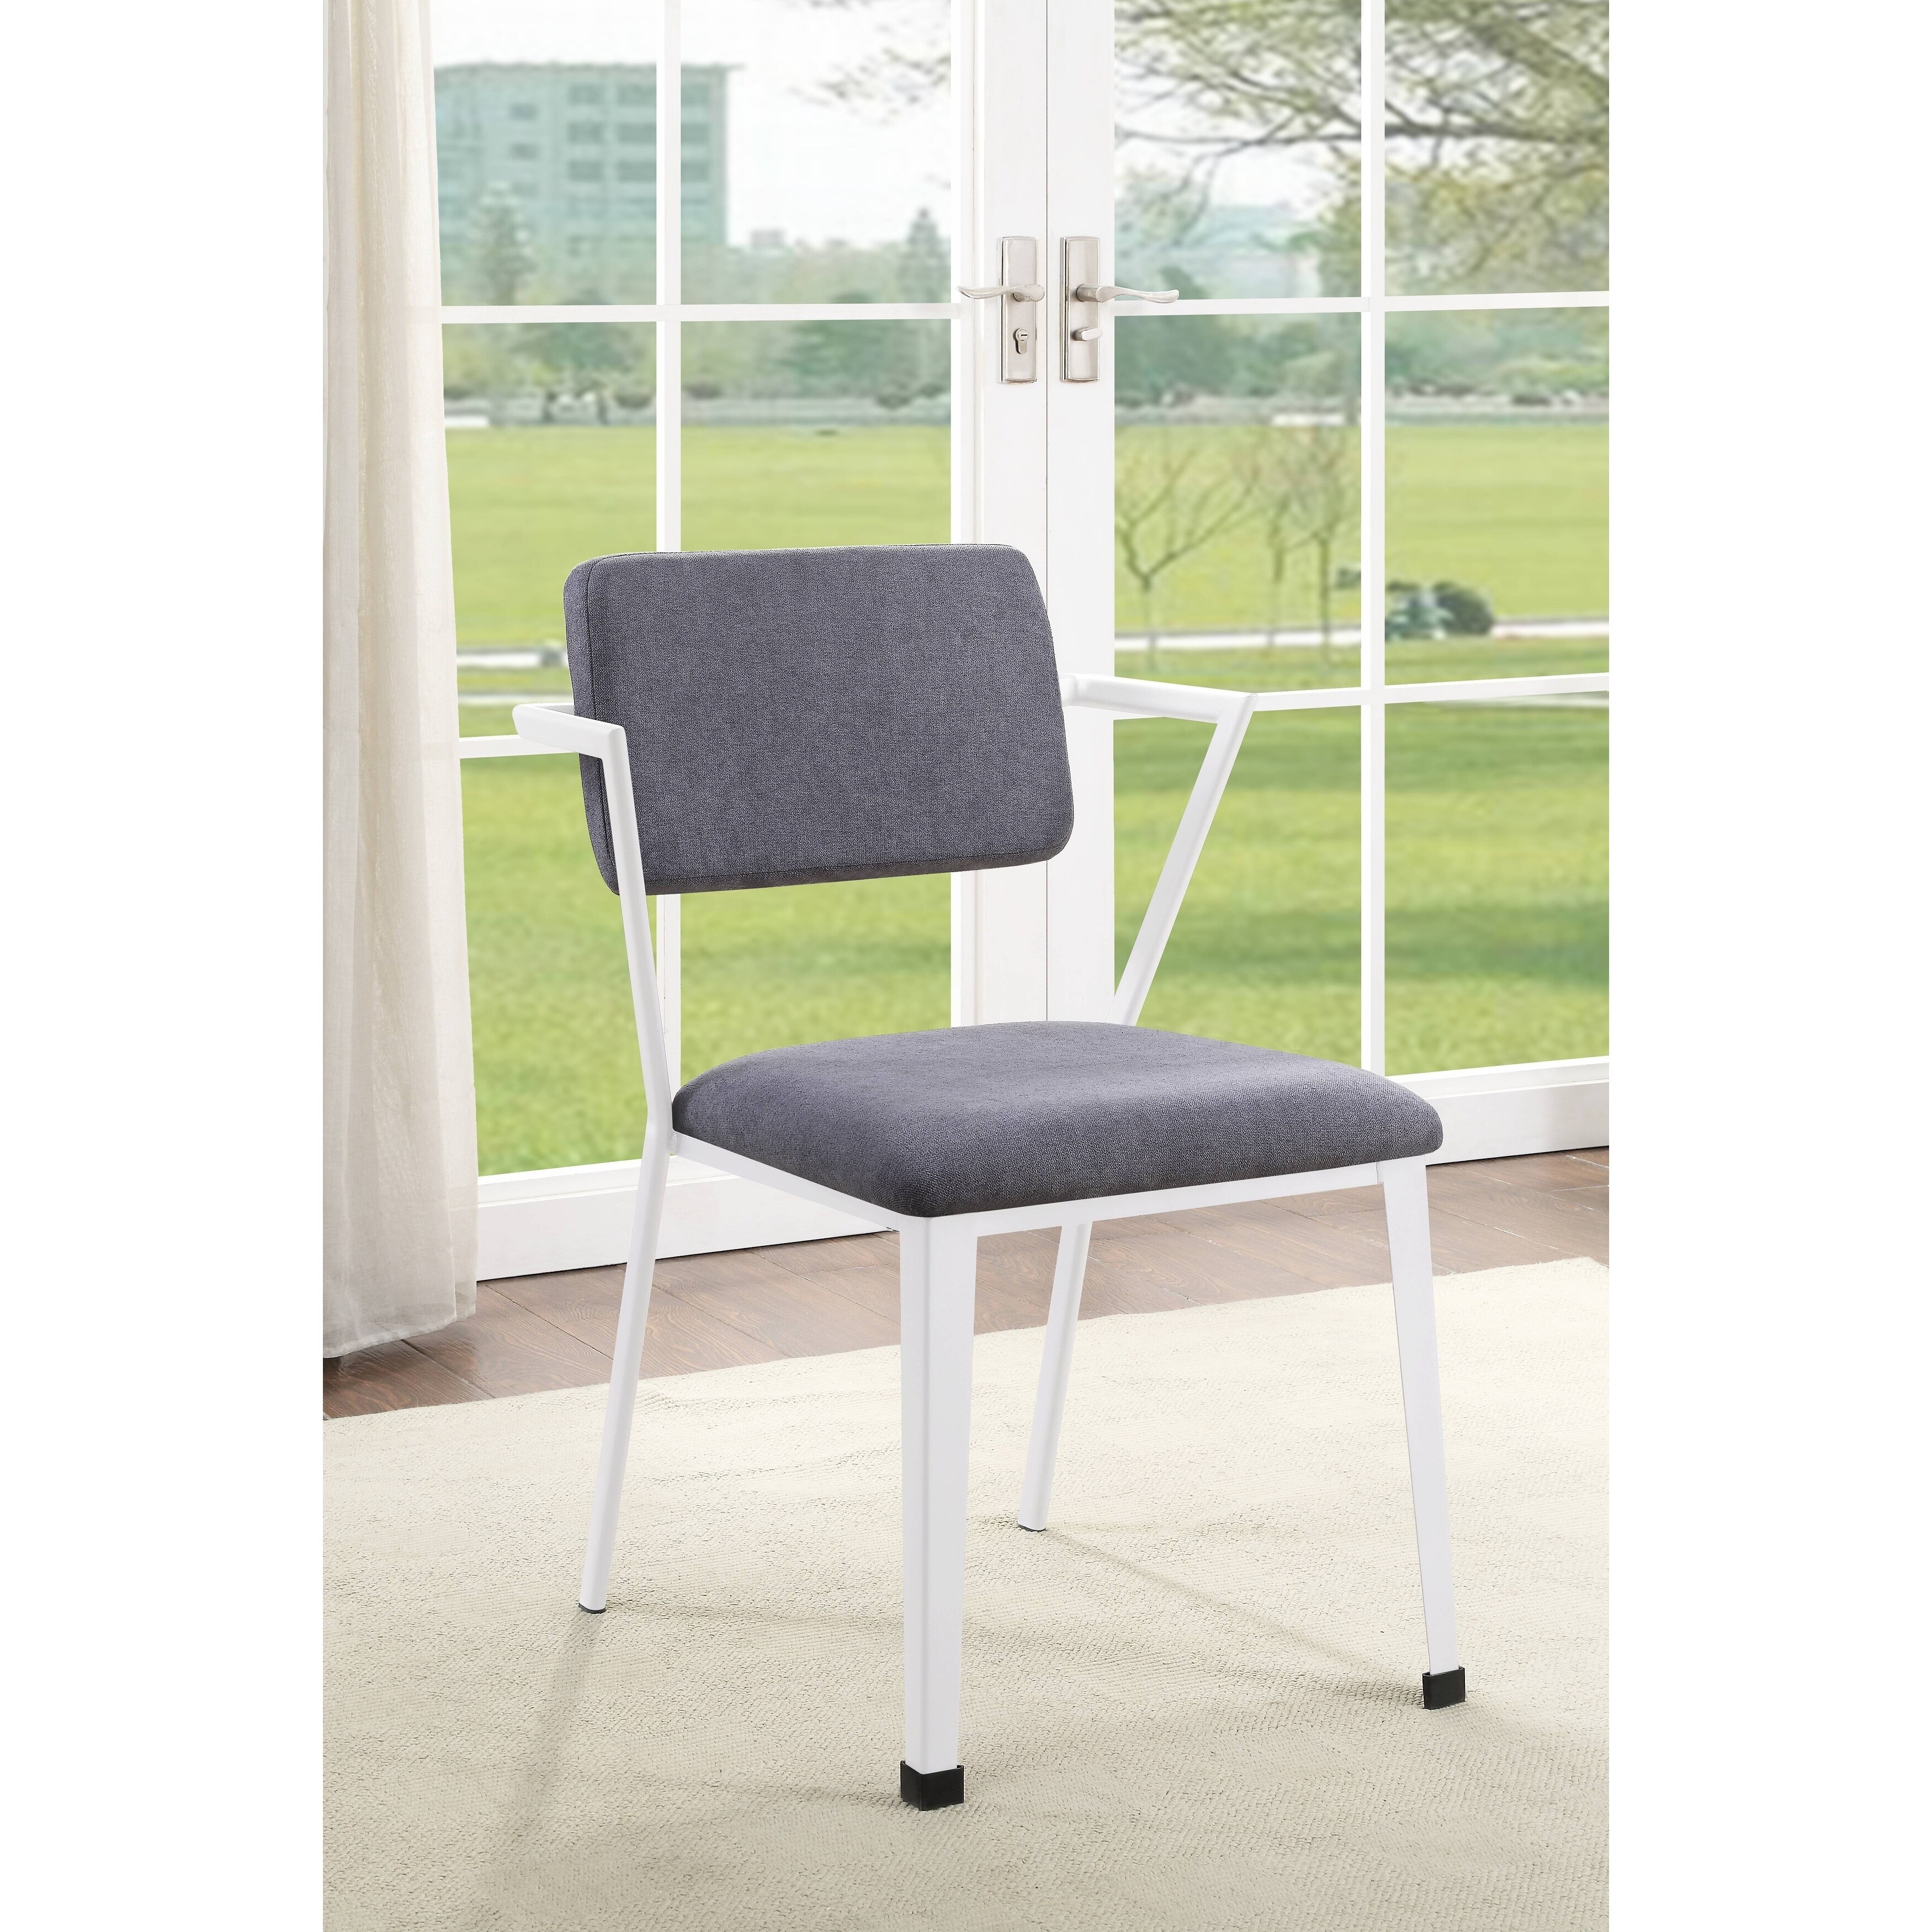 https://ak1.ostkcdn.com/images/products/28232566/ACME-Cargo-Dining-Chair-Set-of-2-in-Gray-Fabric-White-2663f87d-a0e9-4737-8caf-0b7bfe0ef15f.jpg